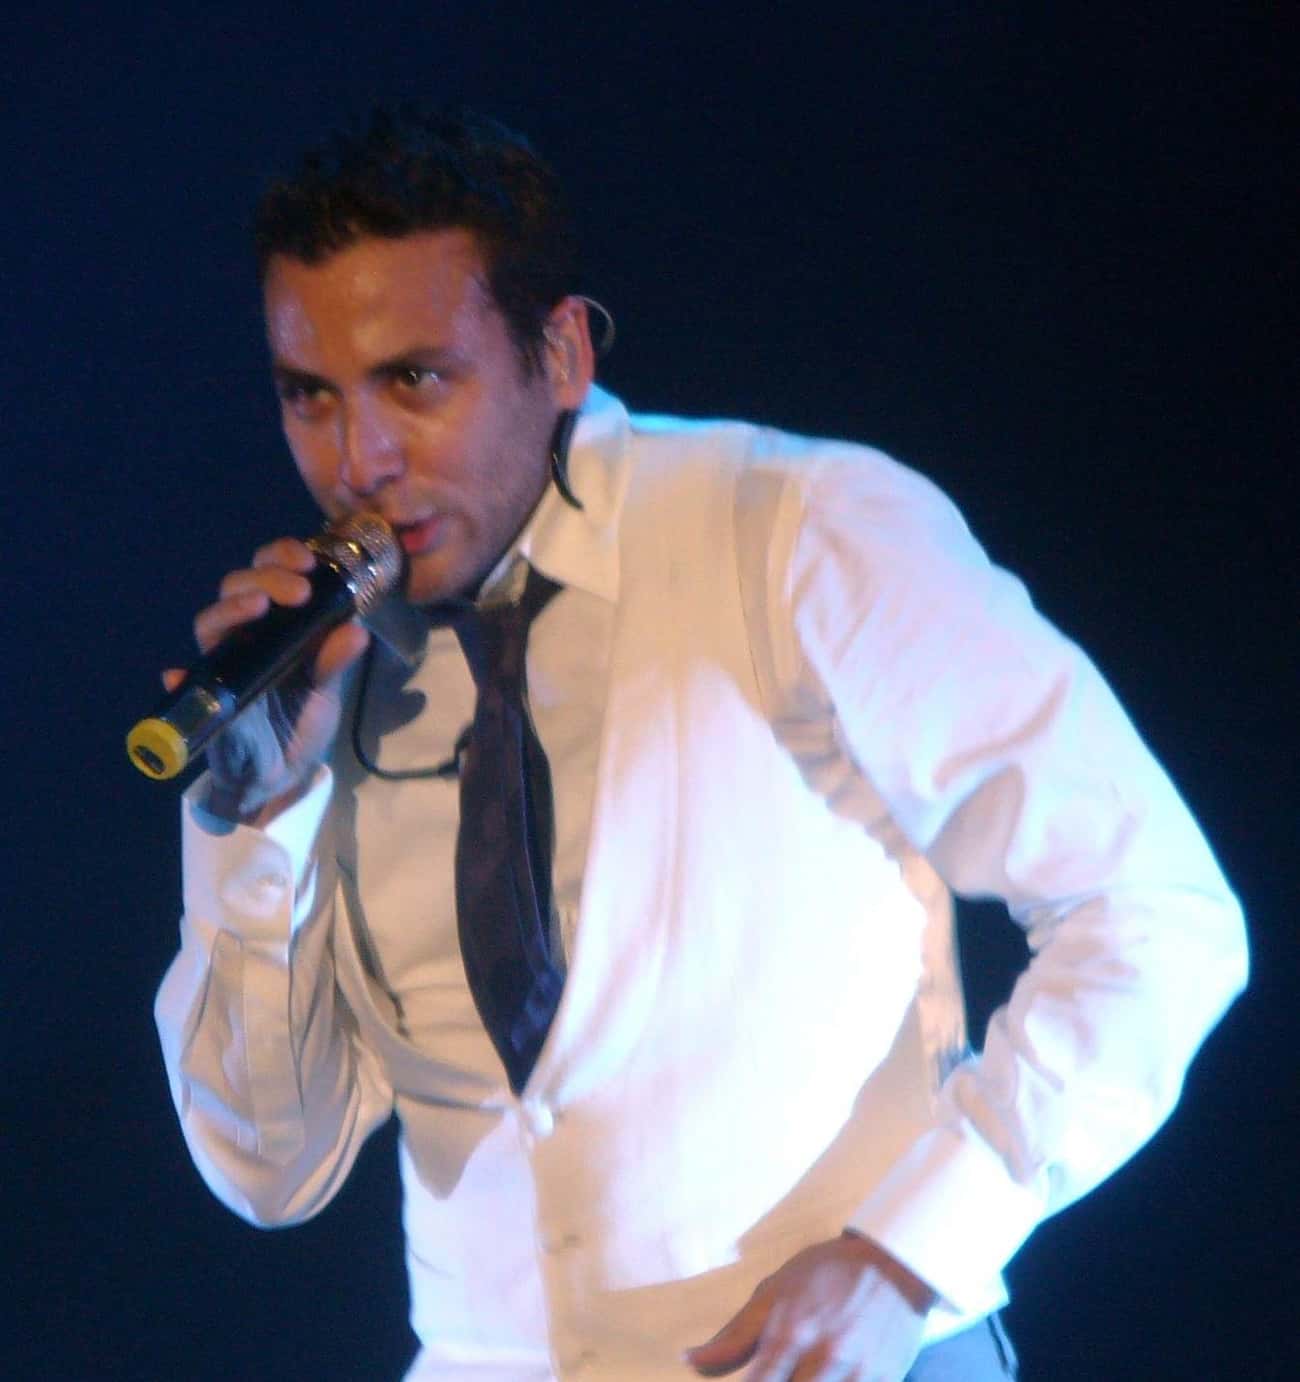 Howie Was The Group's Original Lead Singer